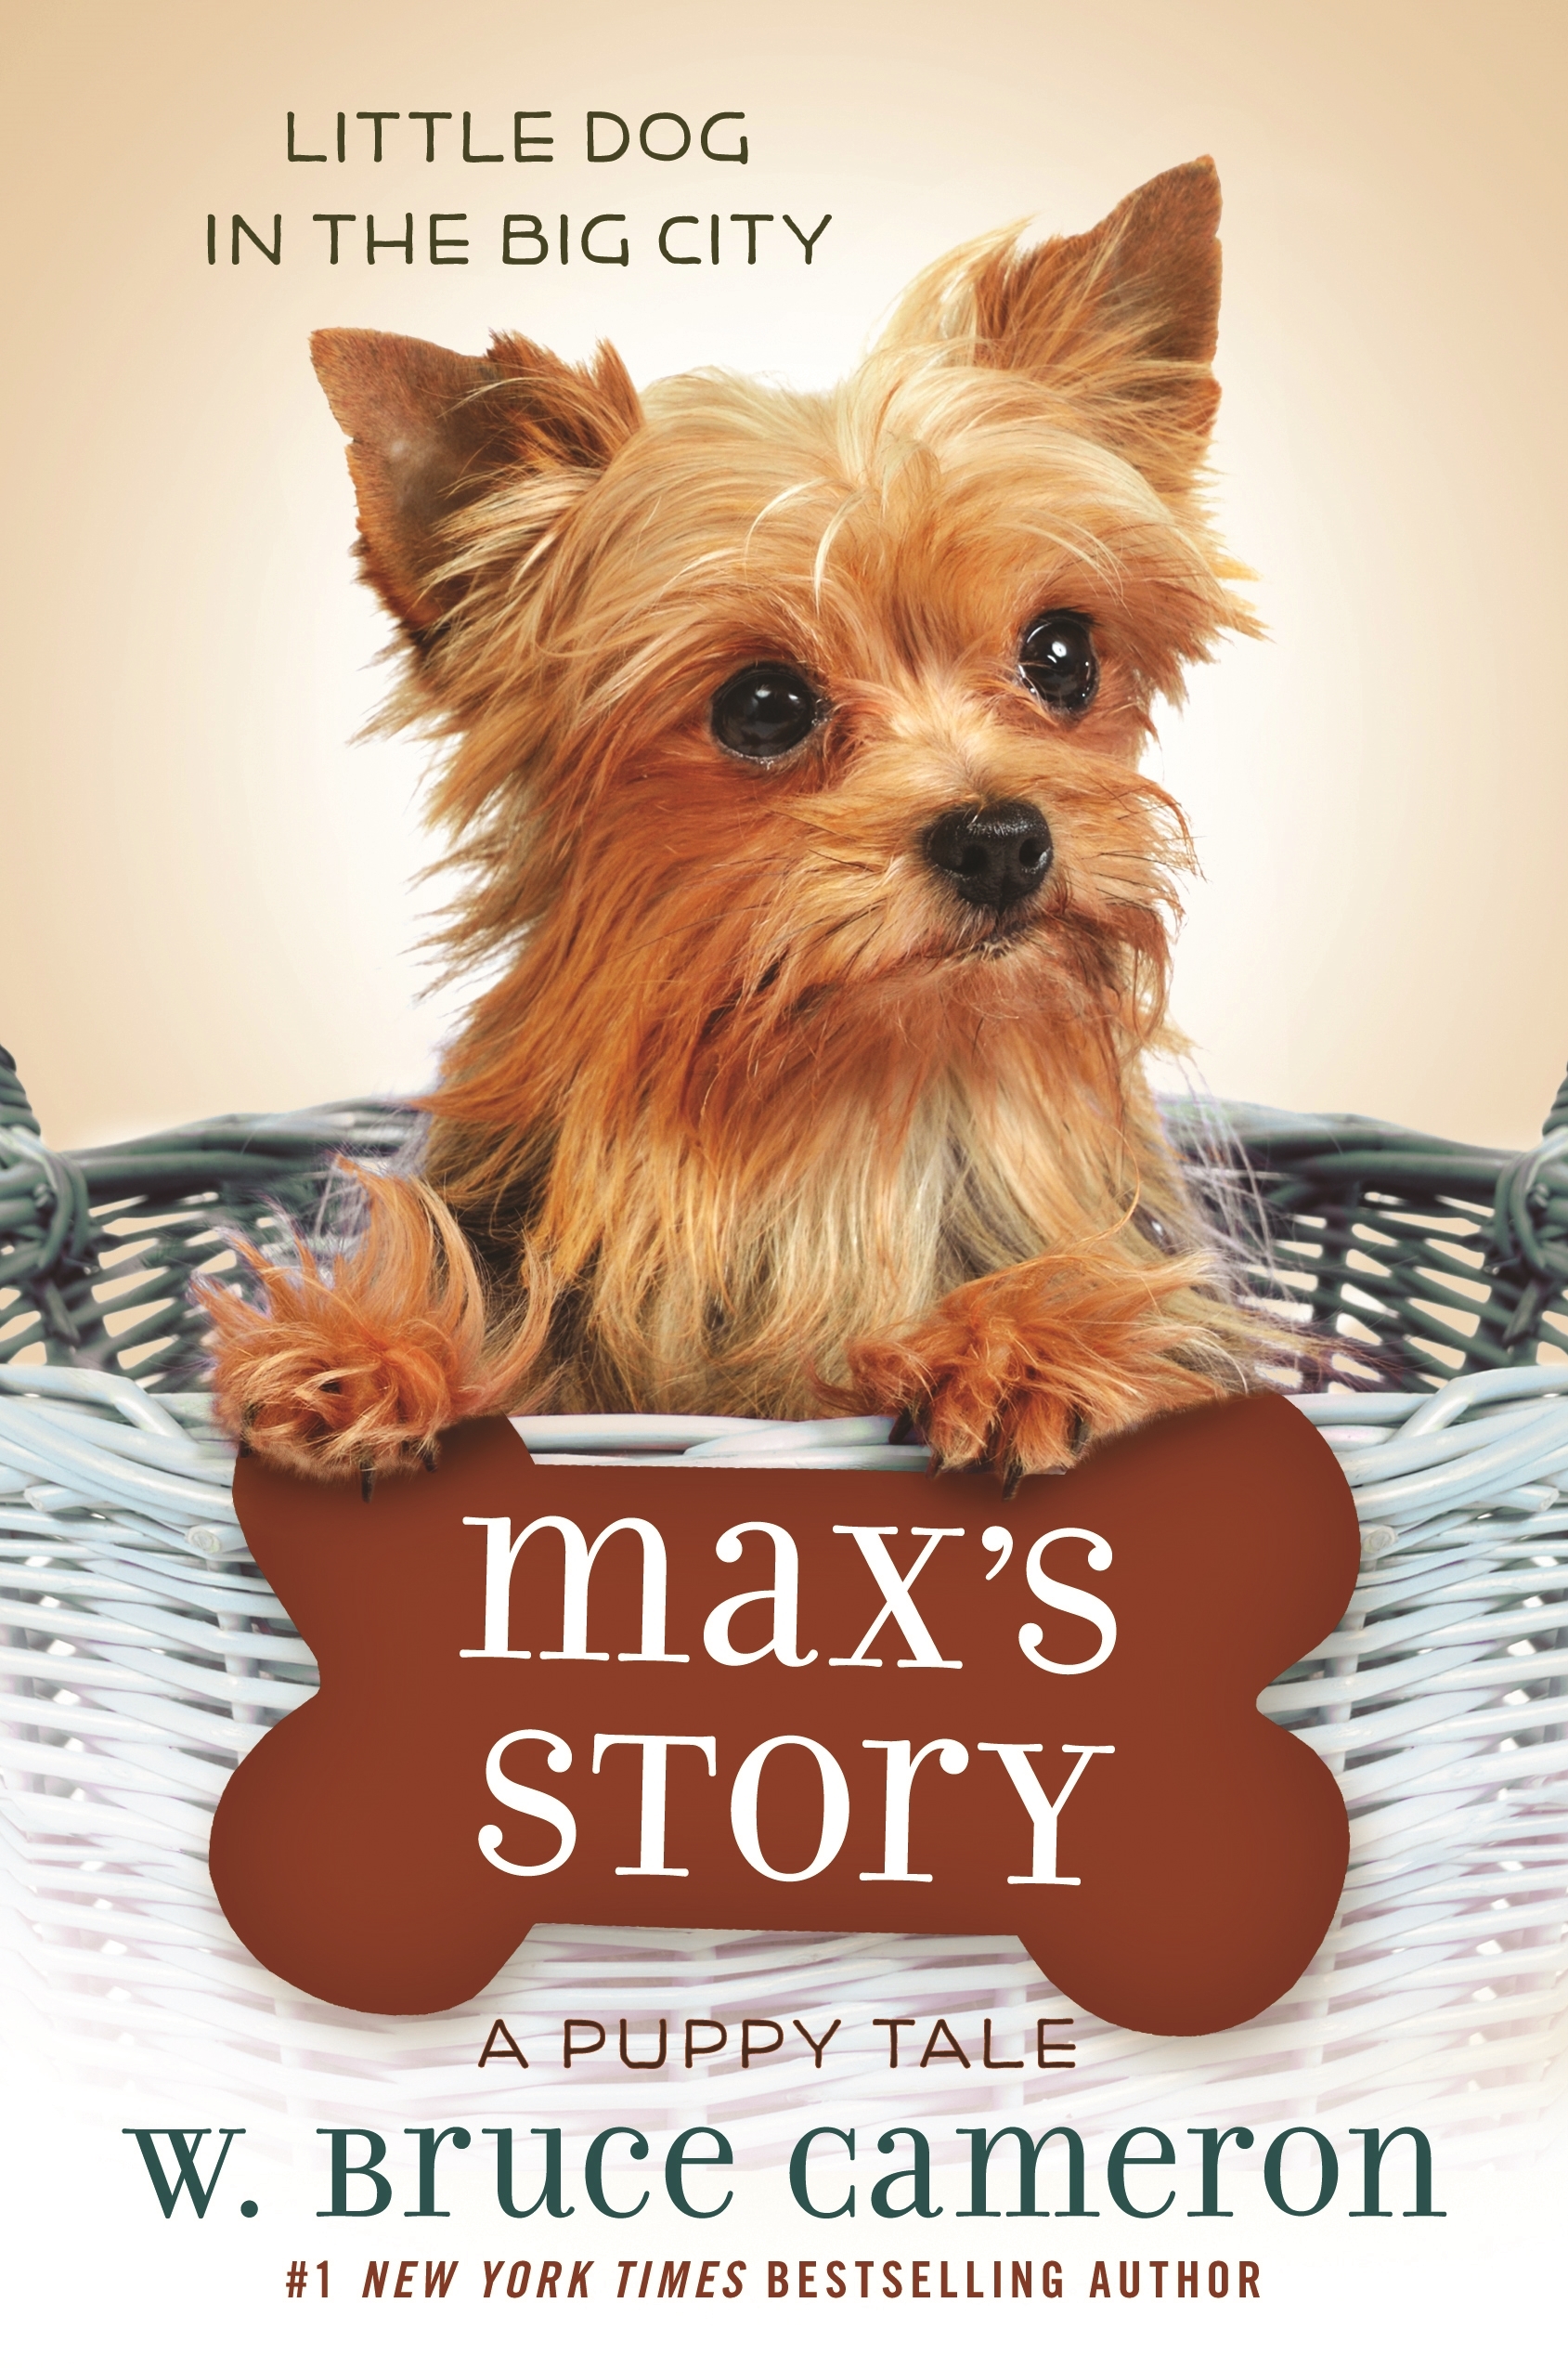 Max's Story : A Puppy Tale by W. Bruce Cameron